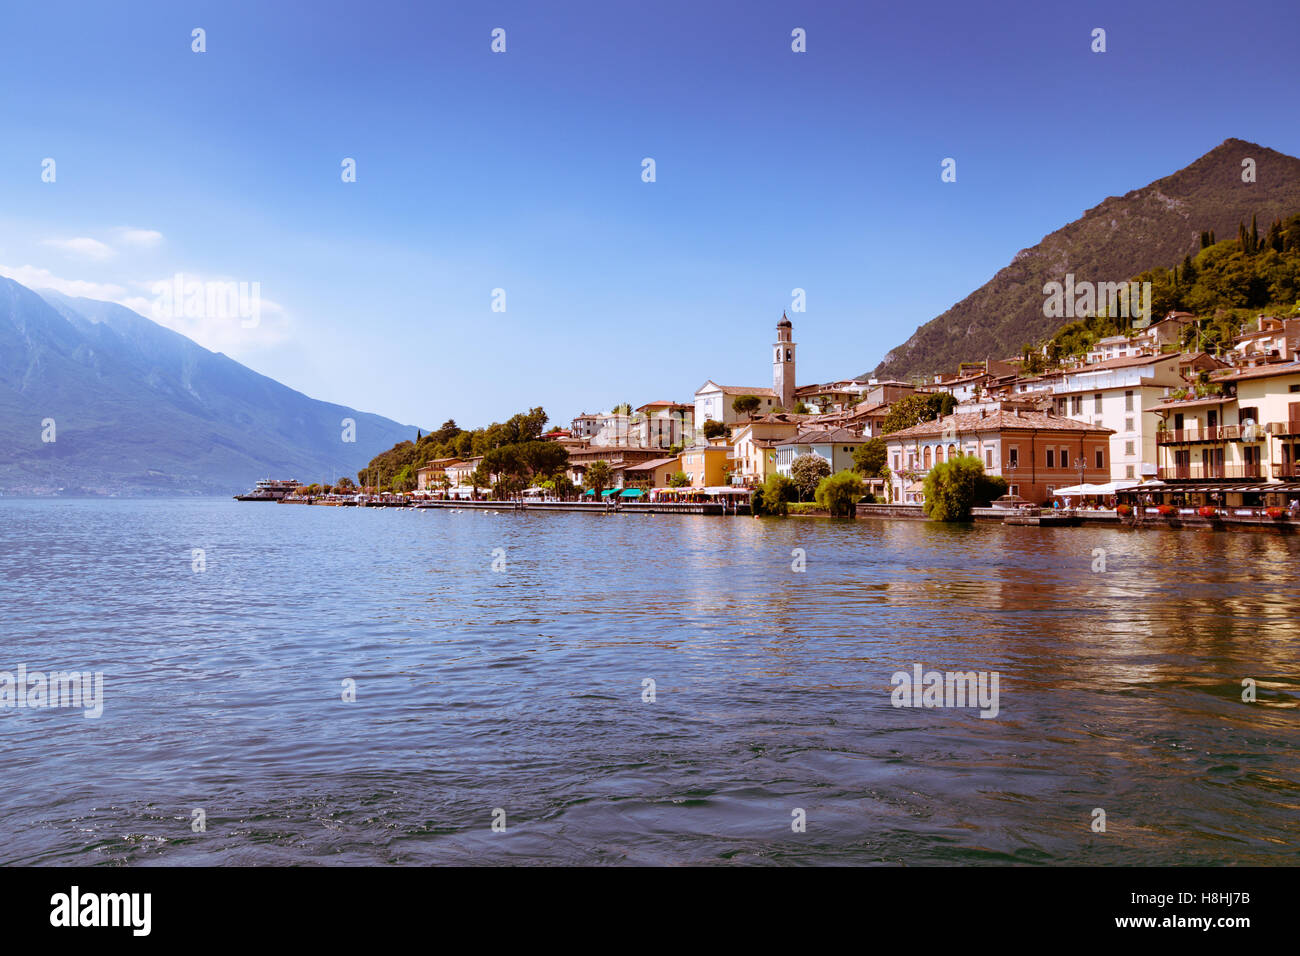 Limone sul Garda is a town in Lombardy (northern Italy), on the shore of Lake Garda. Stock Photo